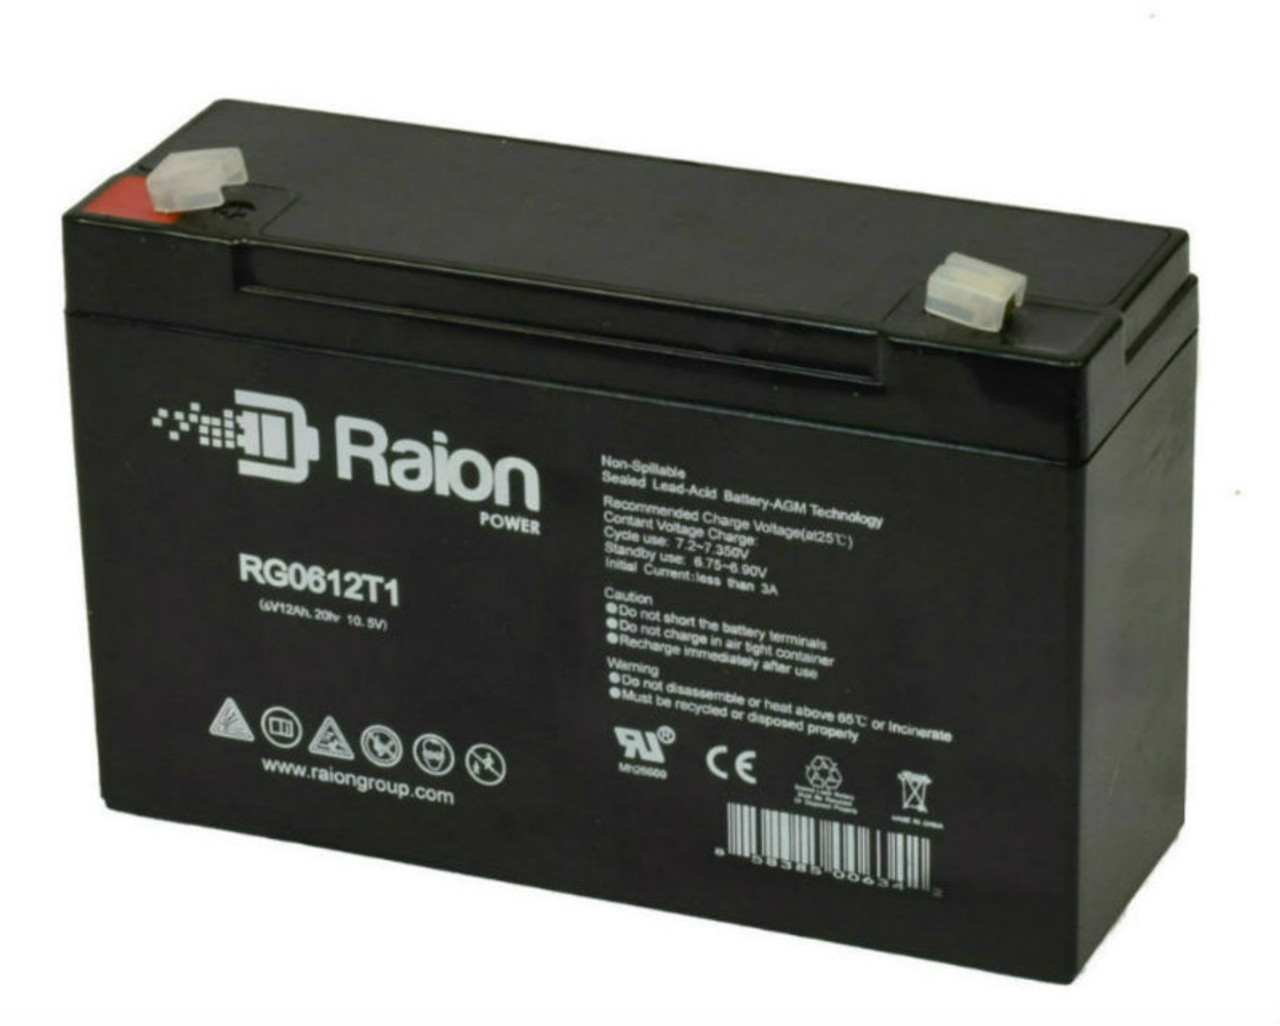 Raion Power RG06120T1 Replacement Battery for Crown Battery 6CE12-F2